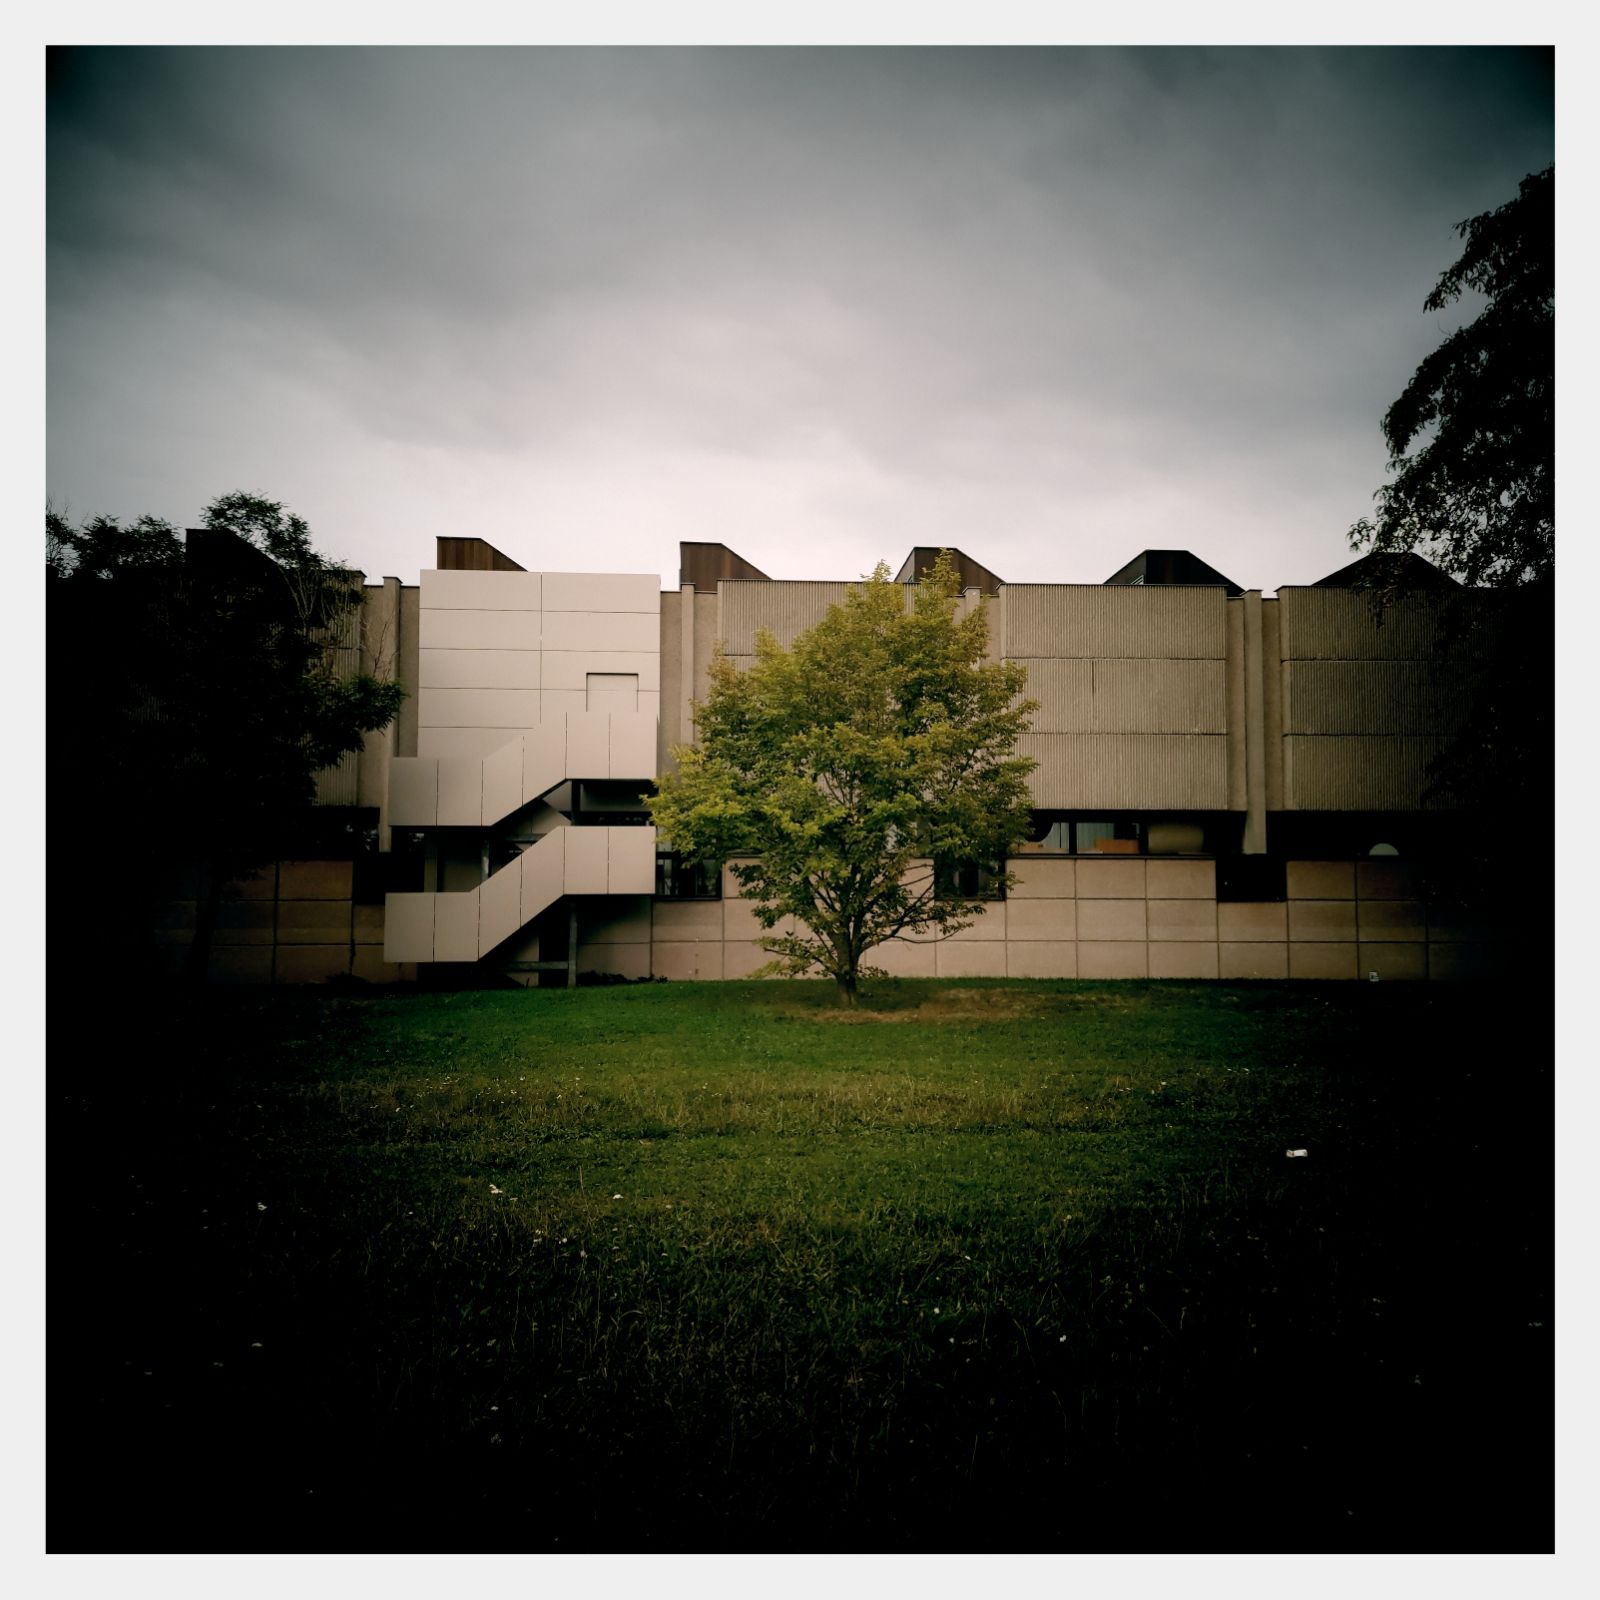 A socialist modern building facade, under grey skies, surrounded by trees.